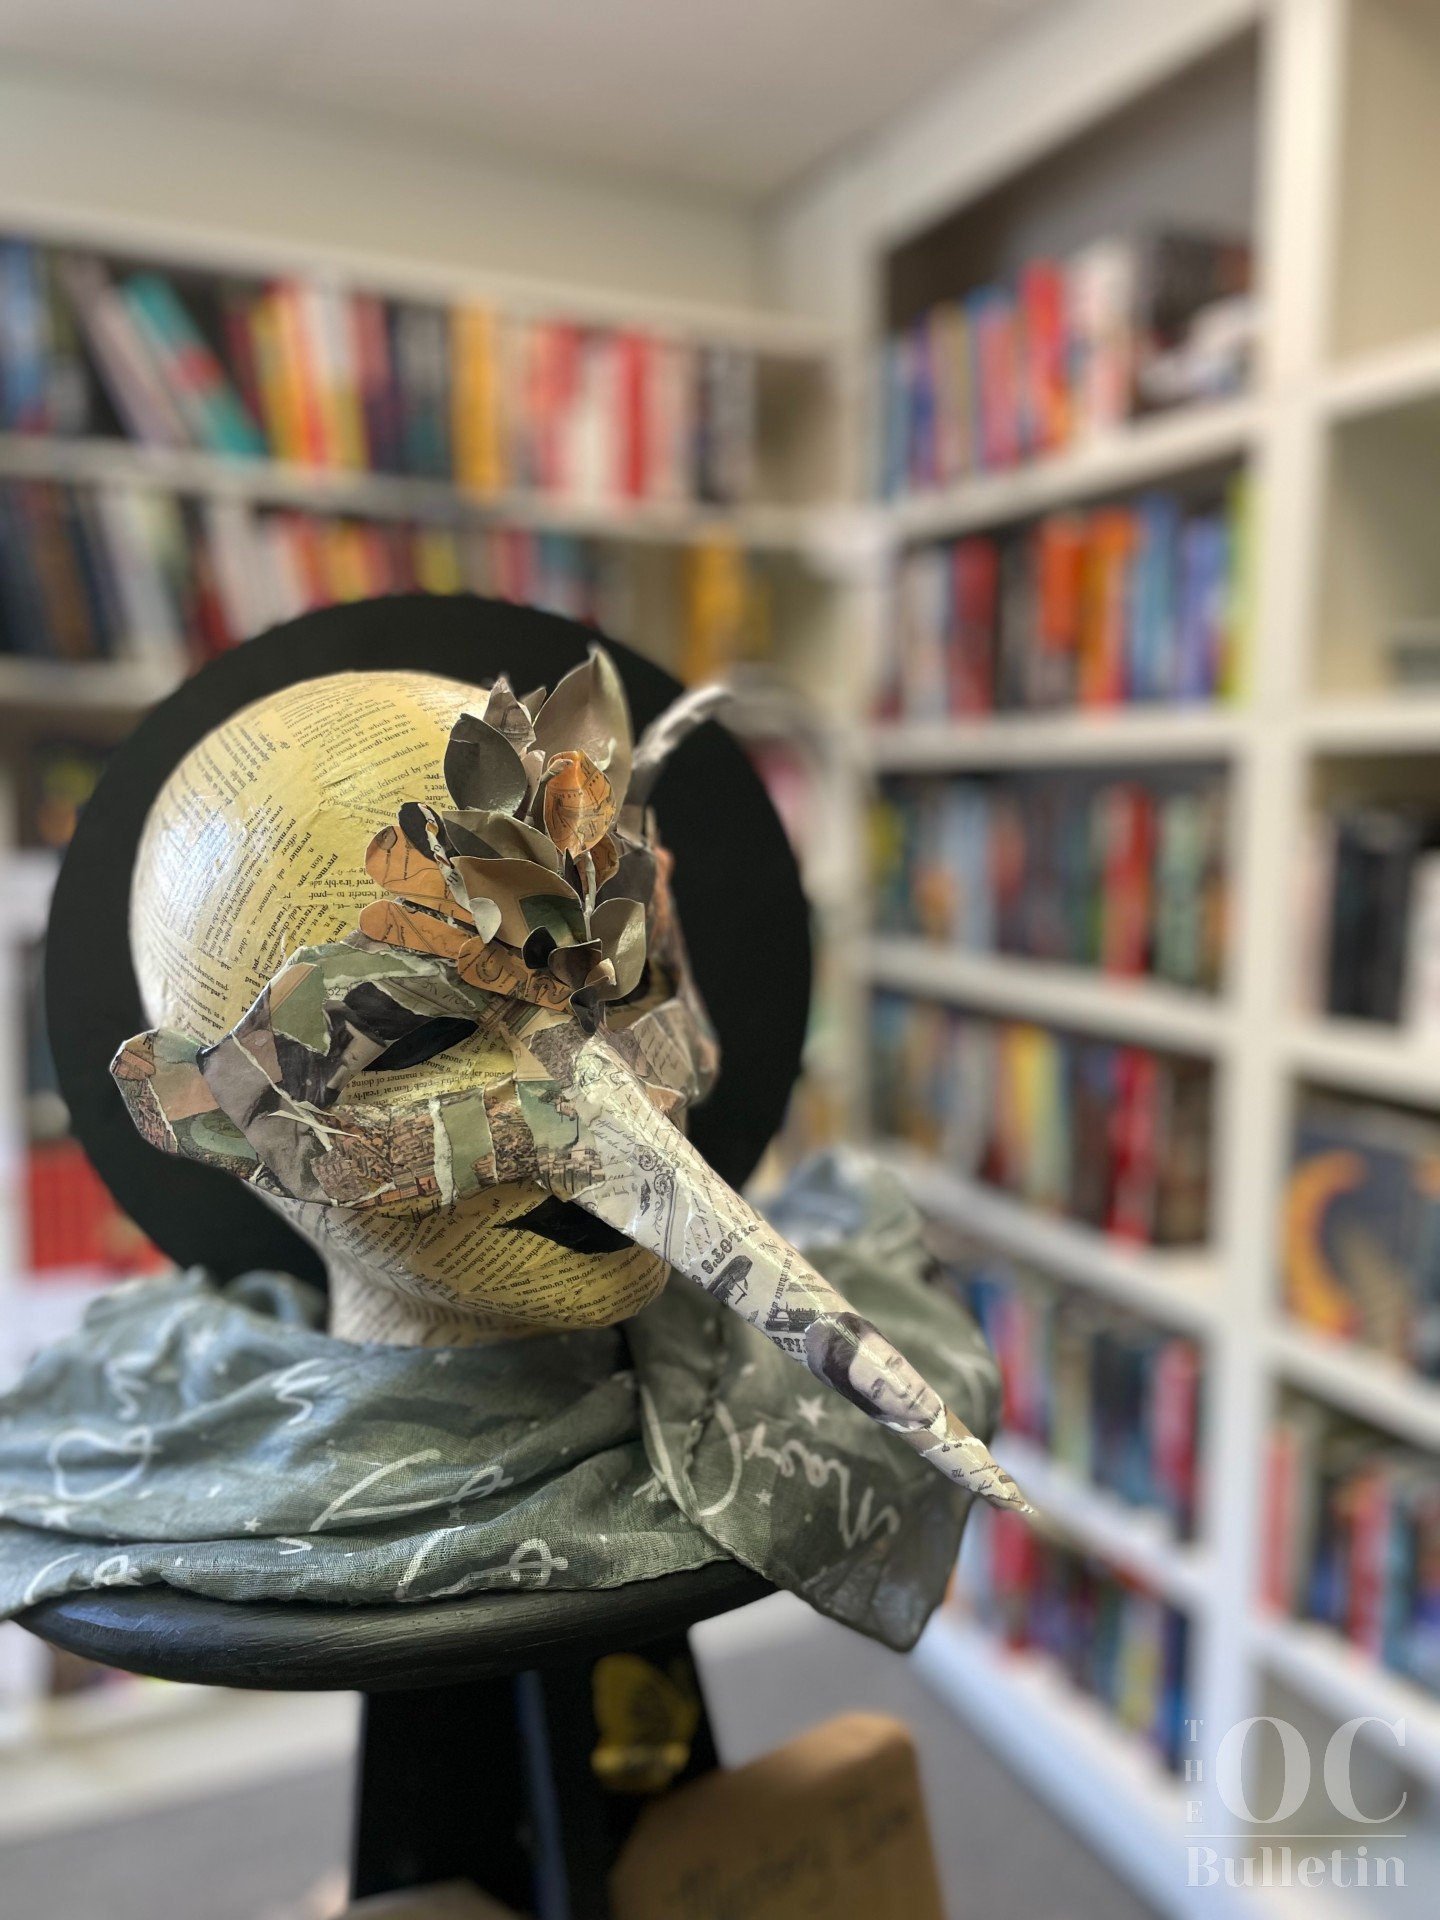  Spelled Ink combines a love of literature and visual art, hosting craft workshops and featuring book art among its displays. (Photo Credit: Spelled Ink) 